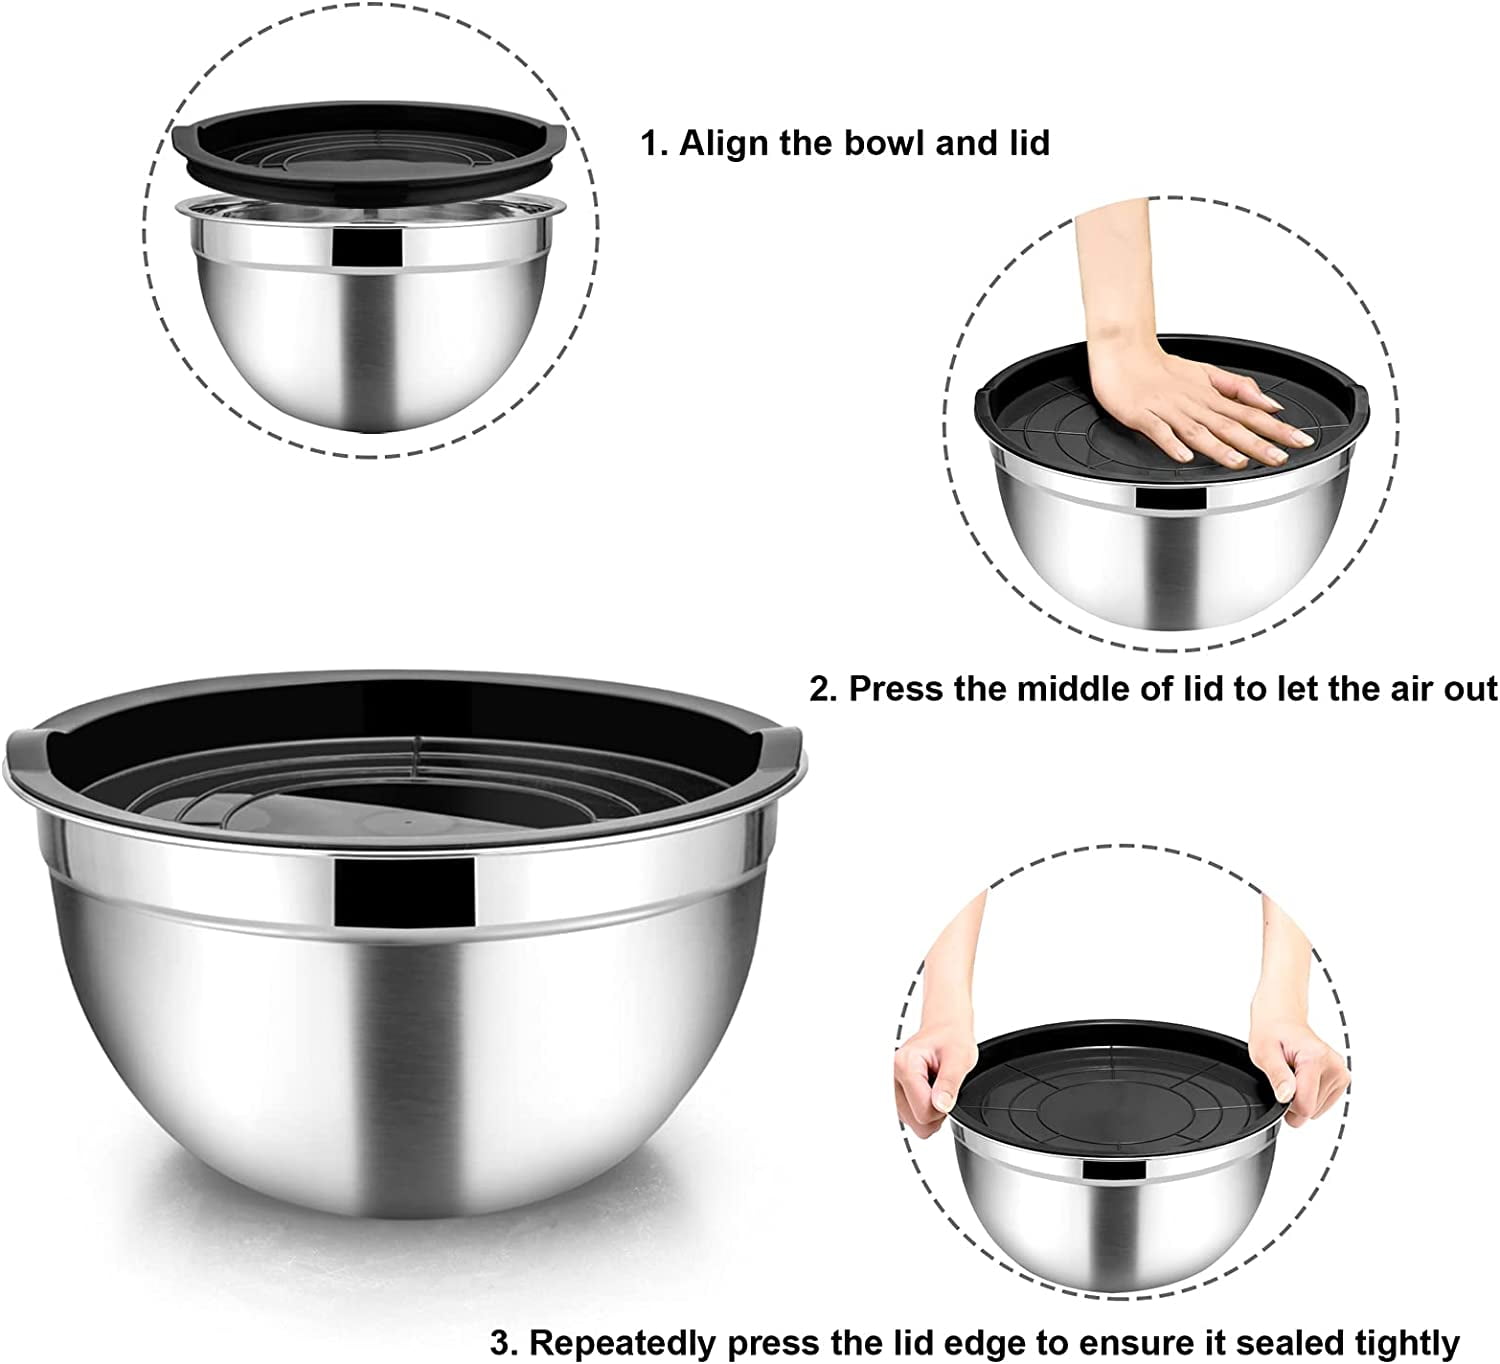 Mixing Bowls with Lids Set of 5, VeSteel Stainless Steel Mixing Bowls Metal Nesting  Bowls with Airtight Lids for Cooking, Baking, Serving 